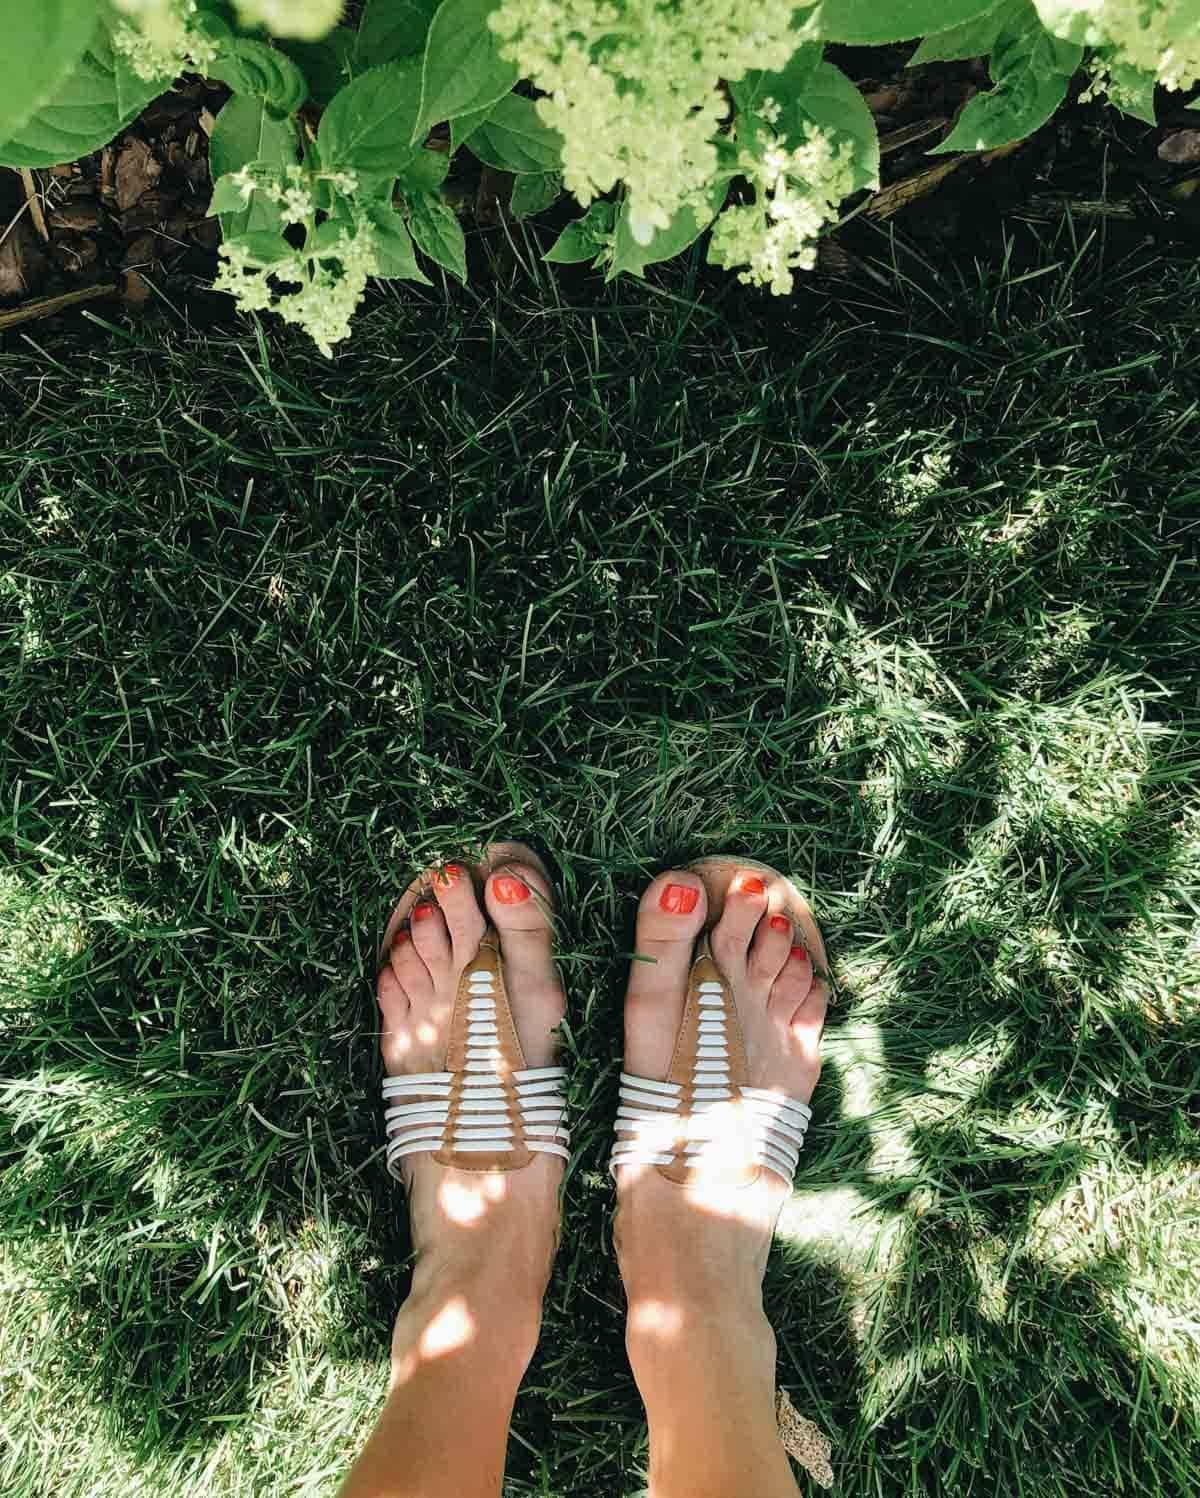 Feet of a woman having red nail polish, wearing sandals can be seen on the green grass.